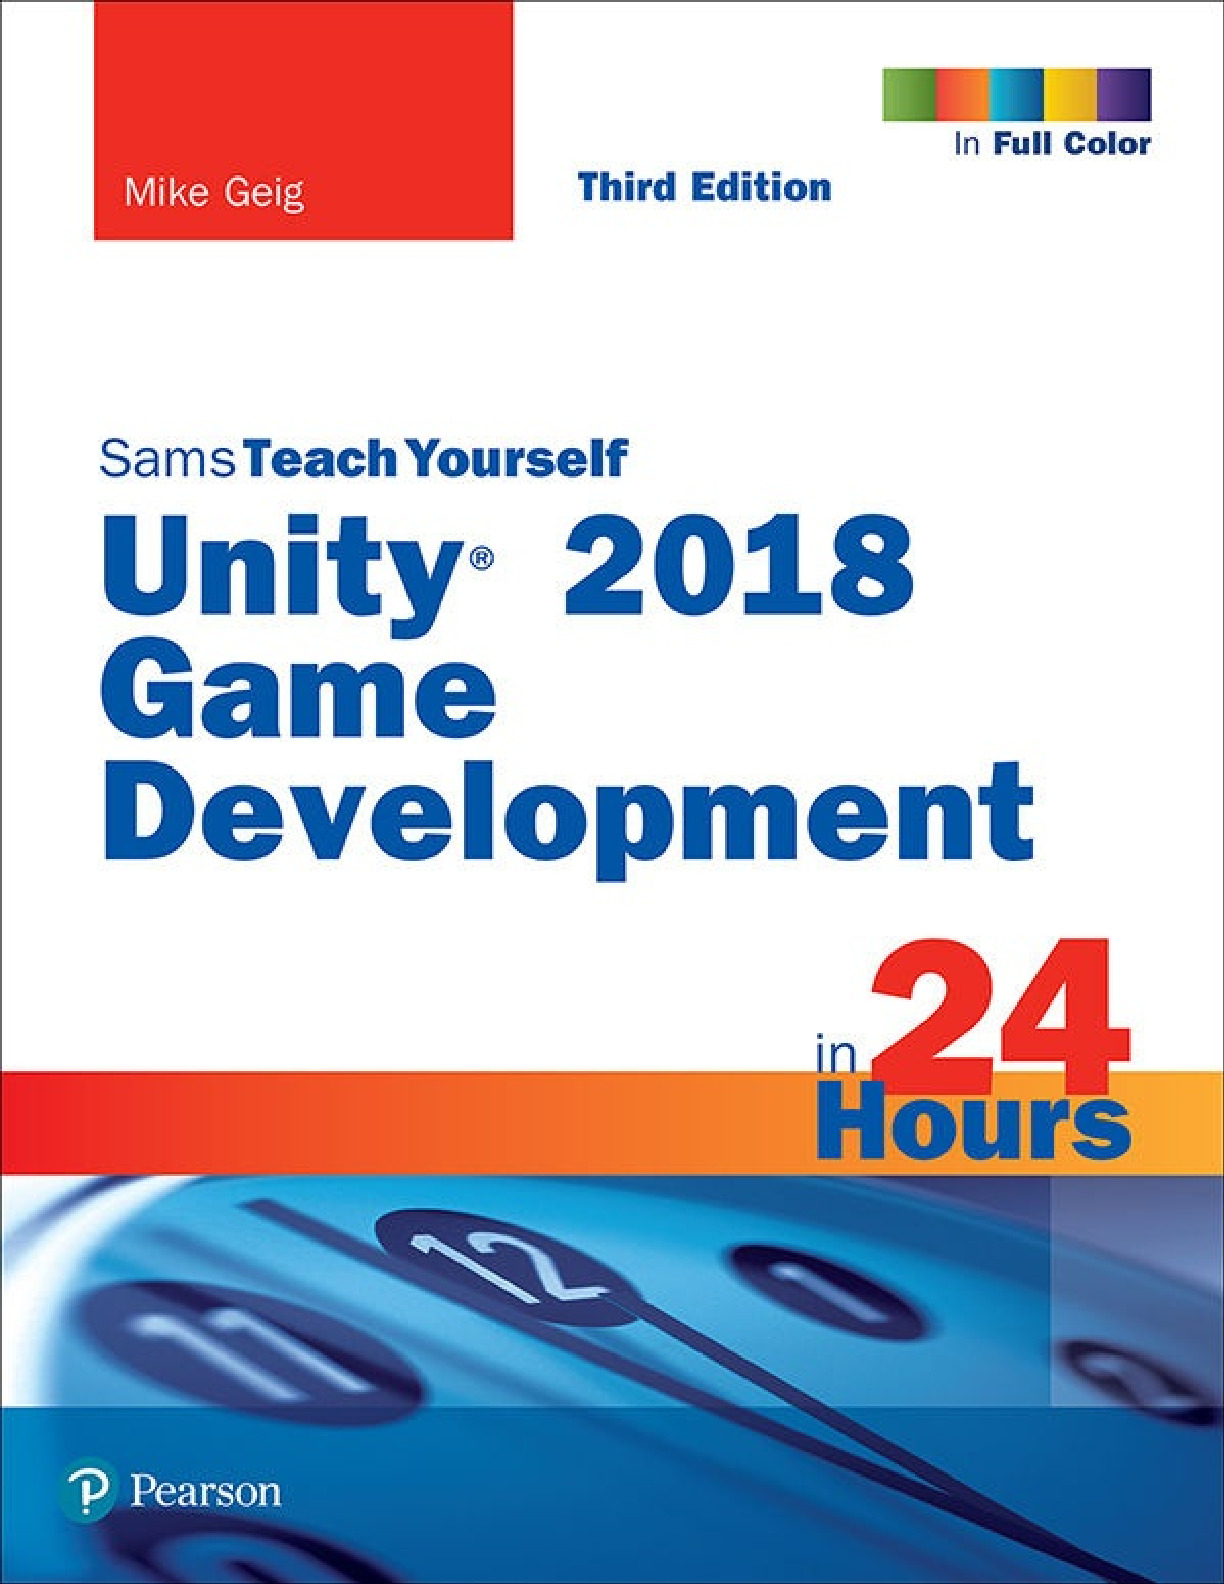 Unity 2018 Game Development in 24 Hours, Sams Teach Yourself ( PDFDrive )